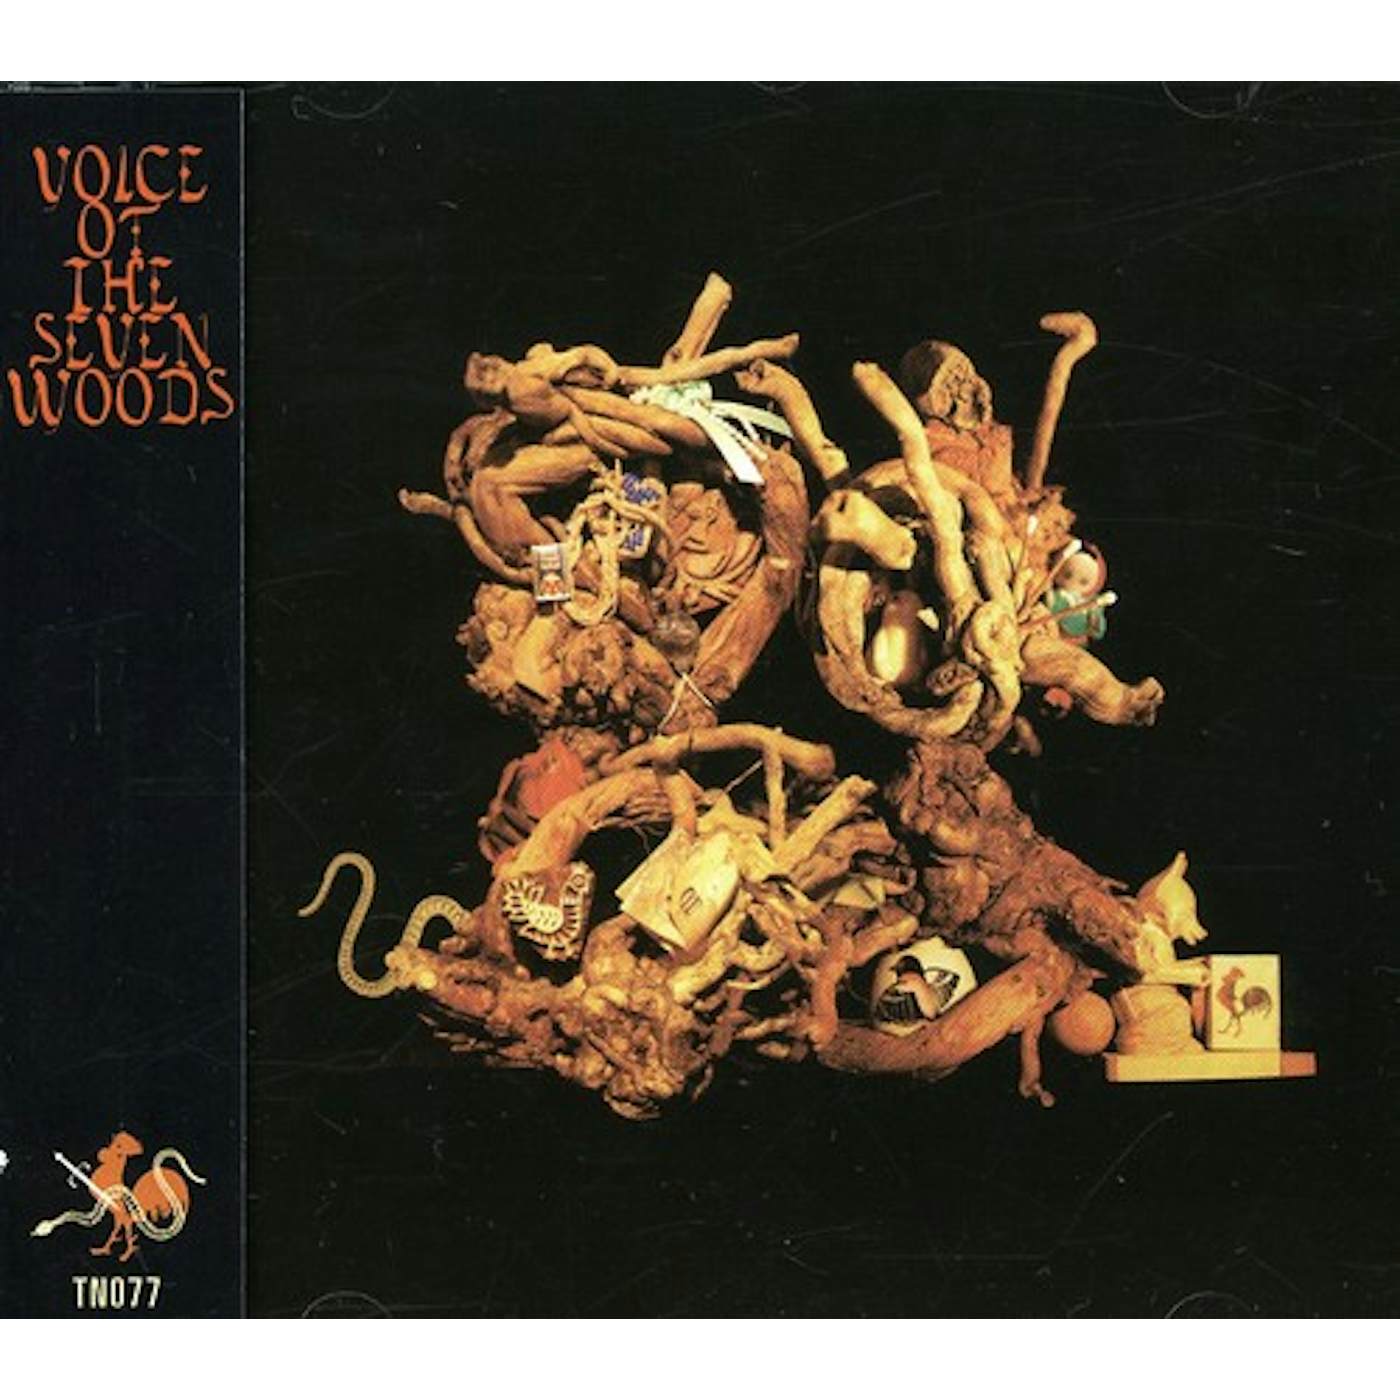 VOICE OF THE SEVEN WOODS CD